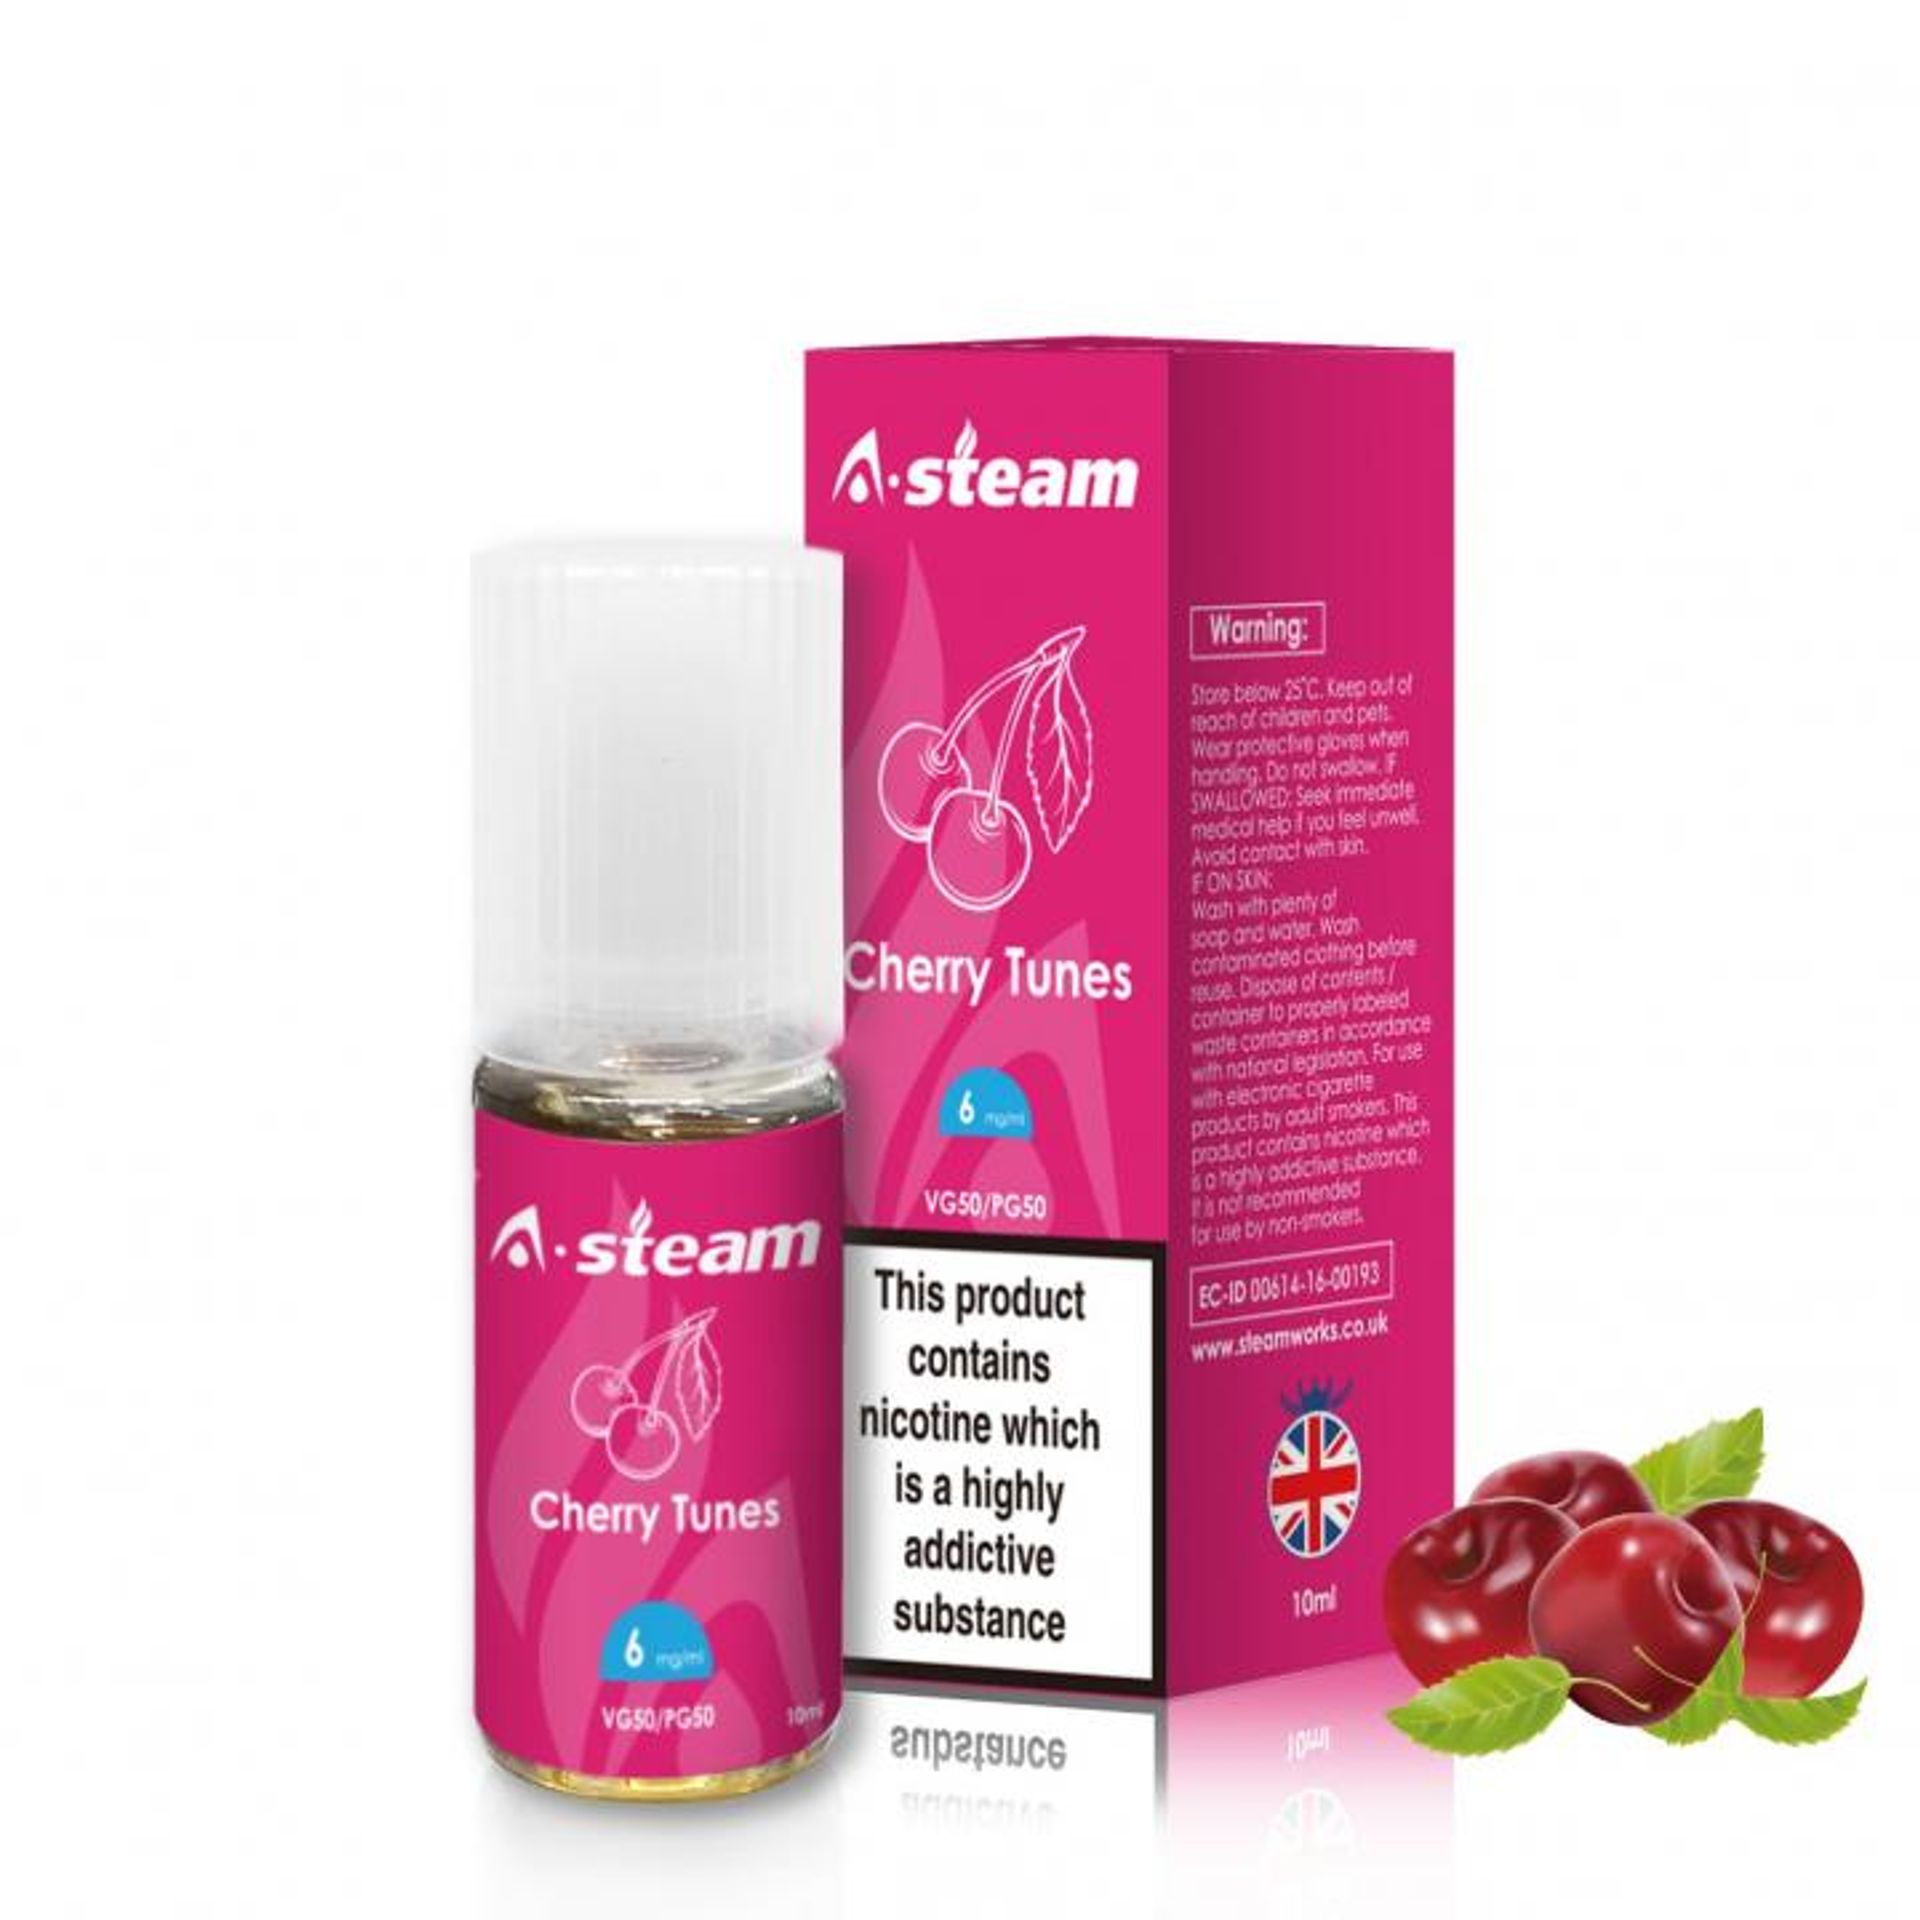 Image of Cherry Tunes by A Steam